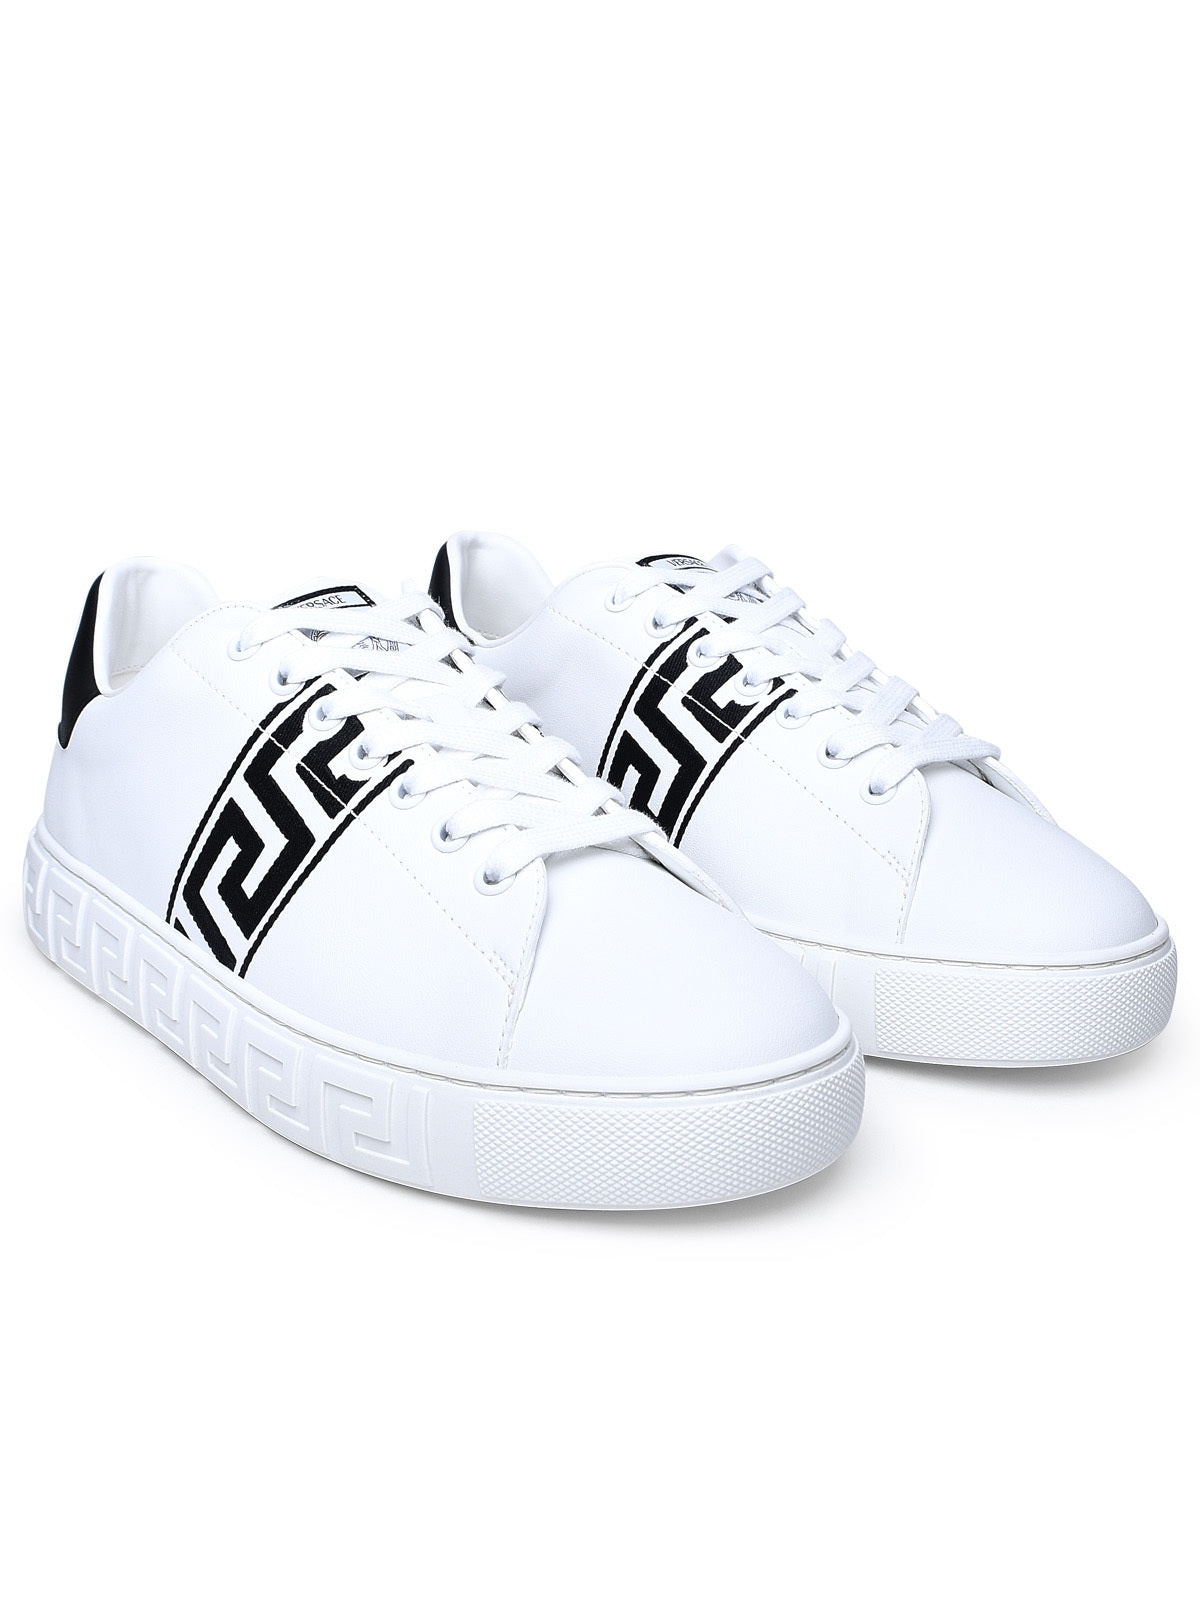 Versace Uomo White Leather Sneakers - 2